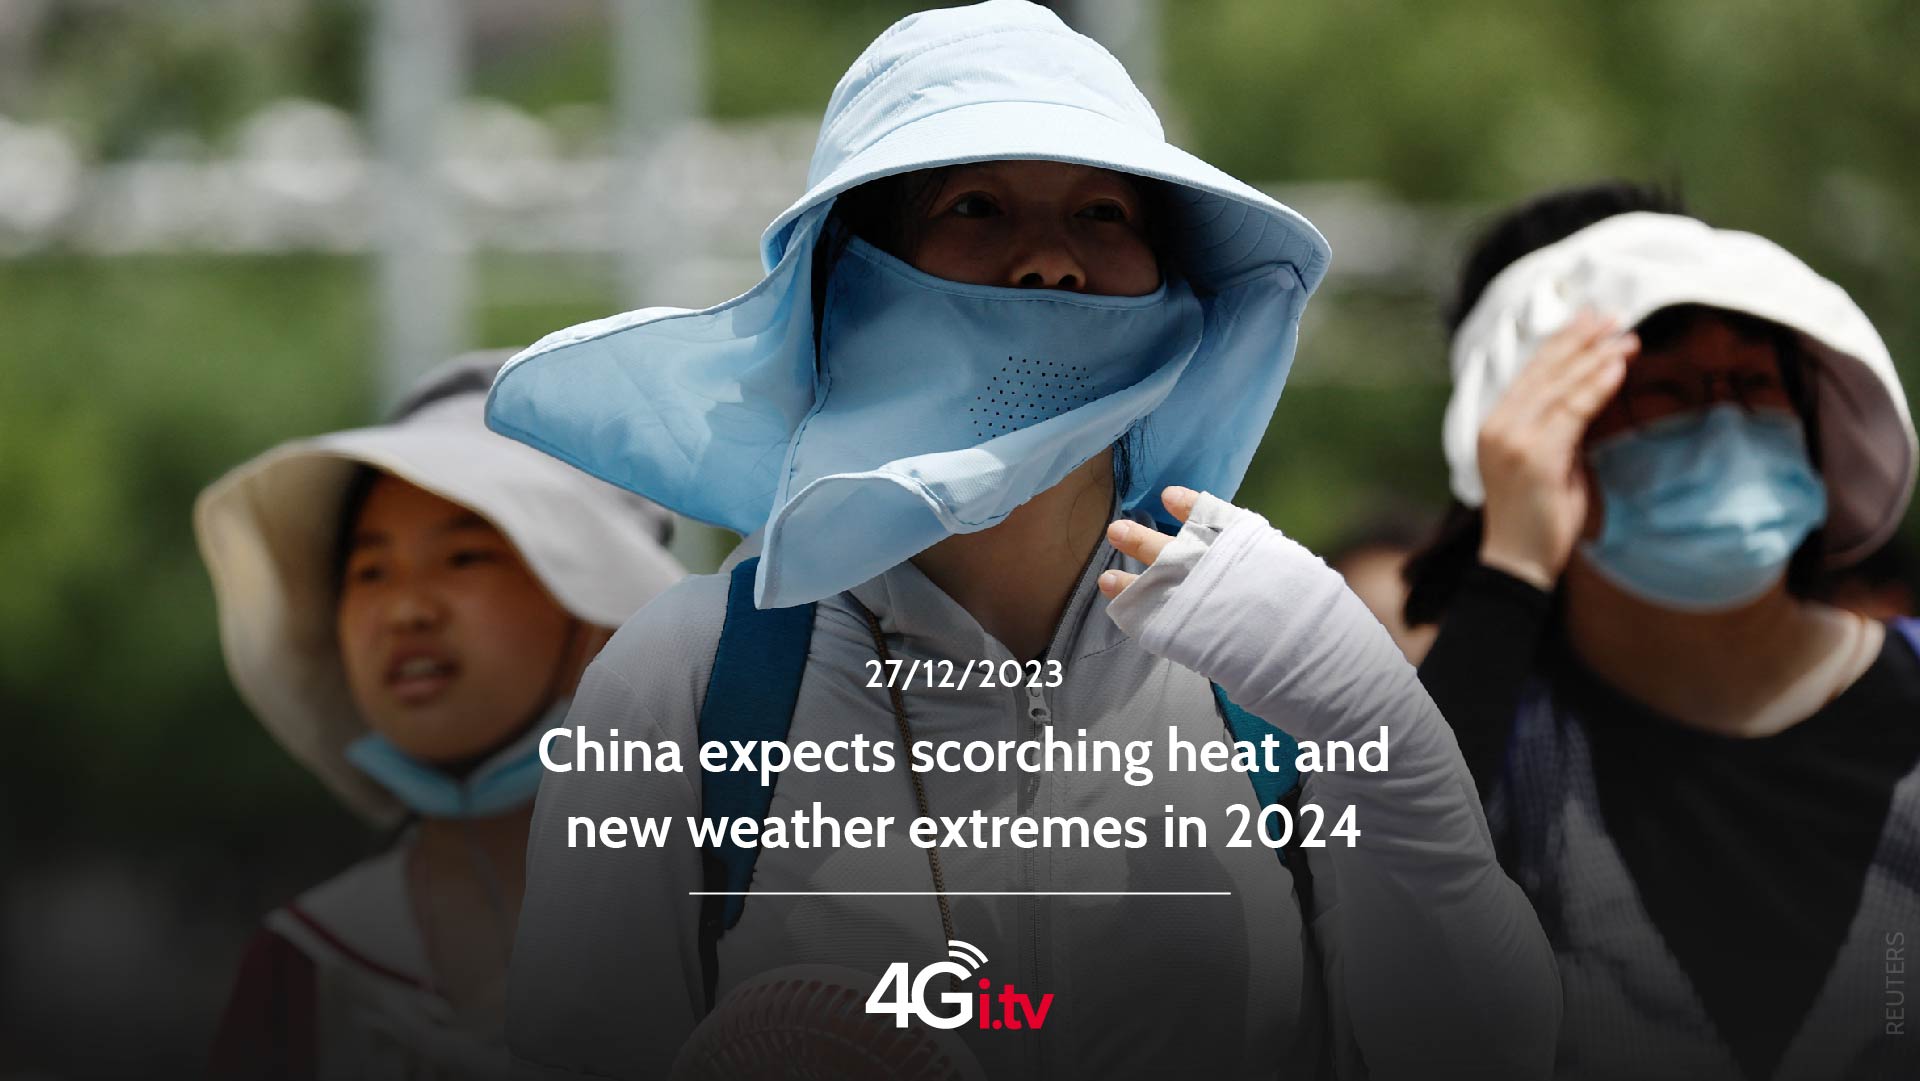 Lee más sobre el artículo China expects scorching heat and new weather extremes in 2024